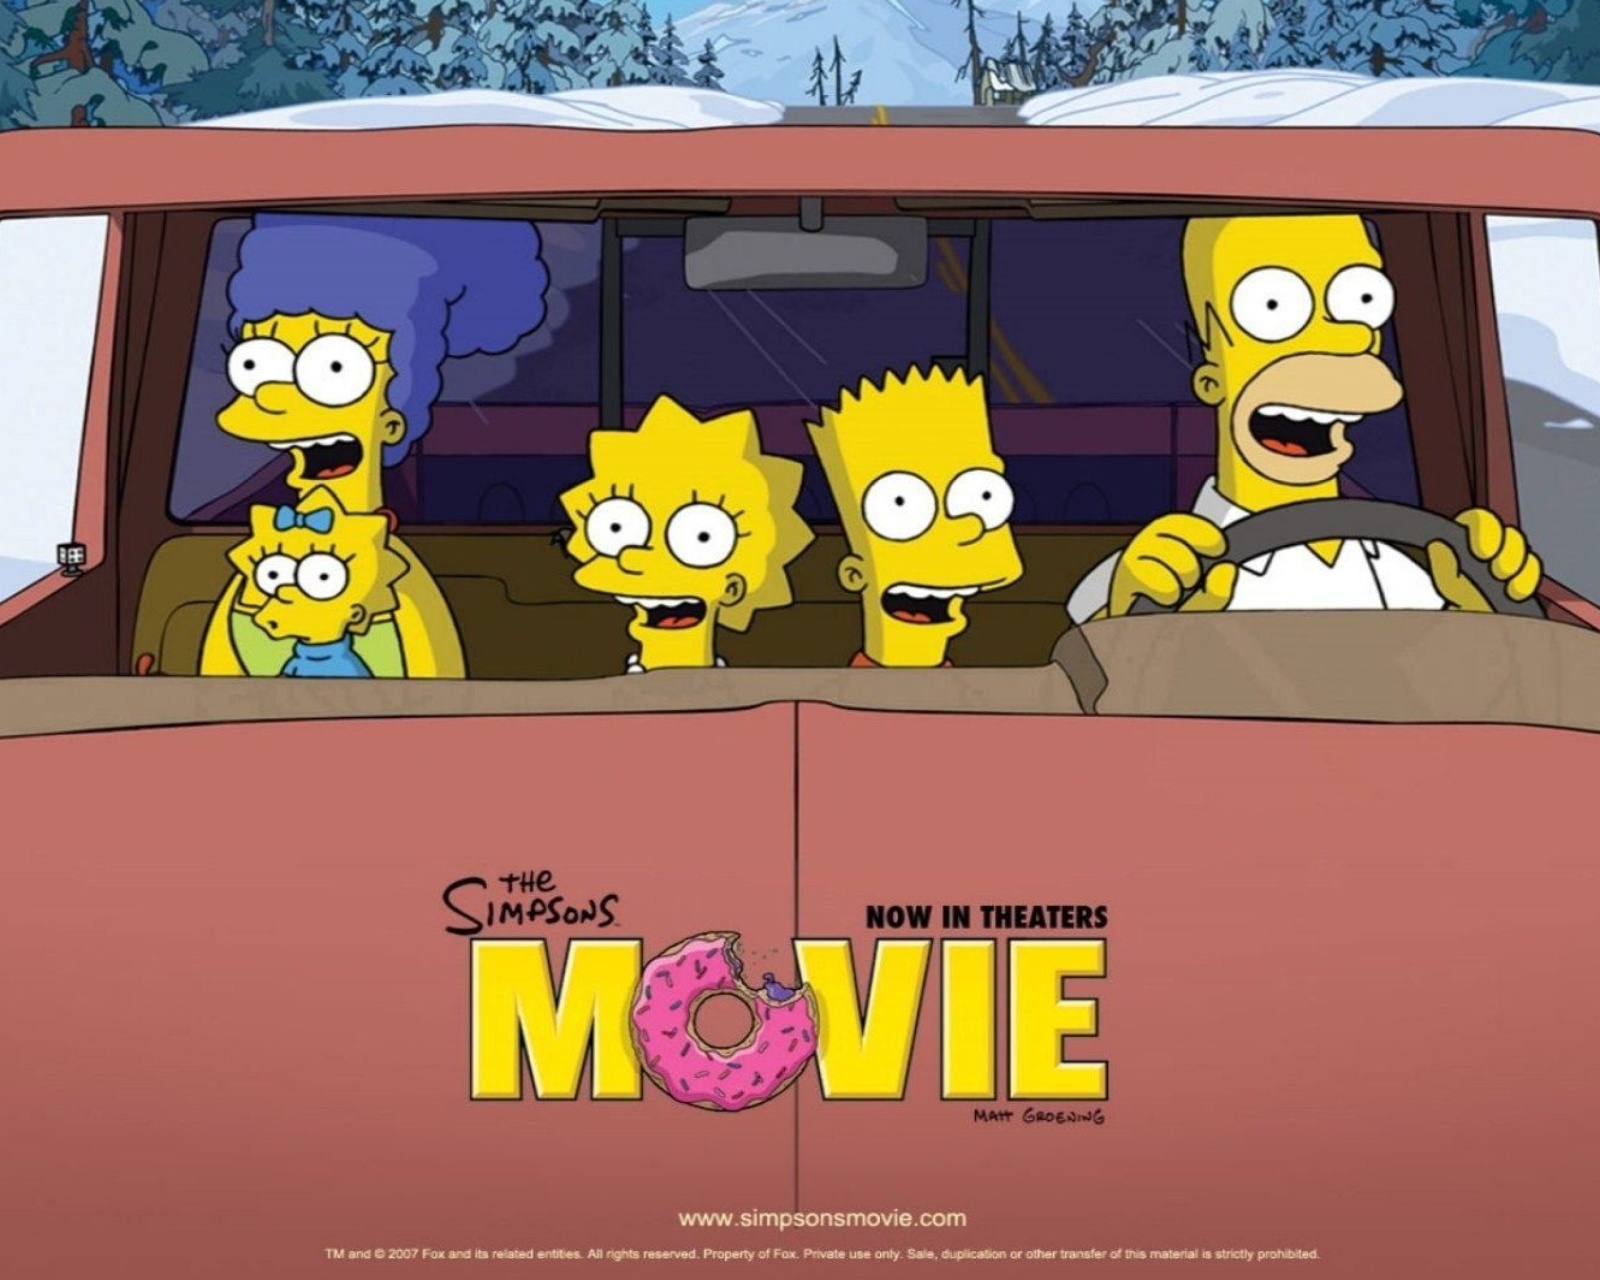 The Simpsons Movie wallpaper 1600x1280